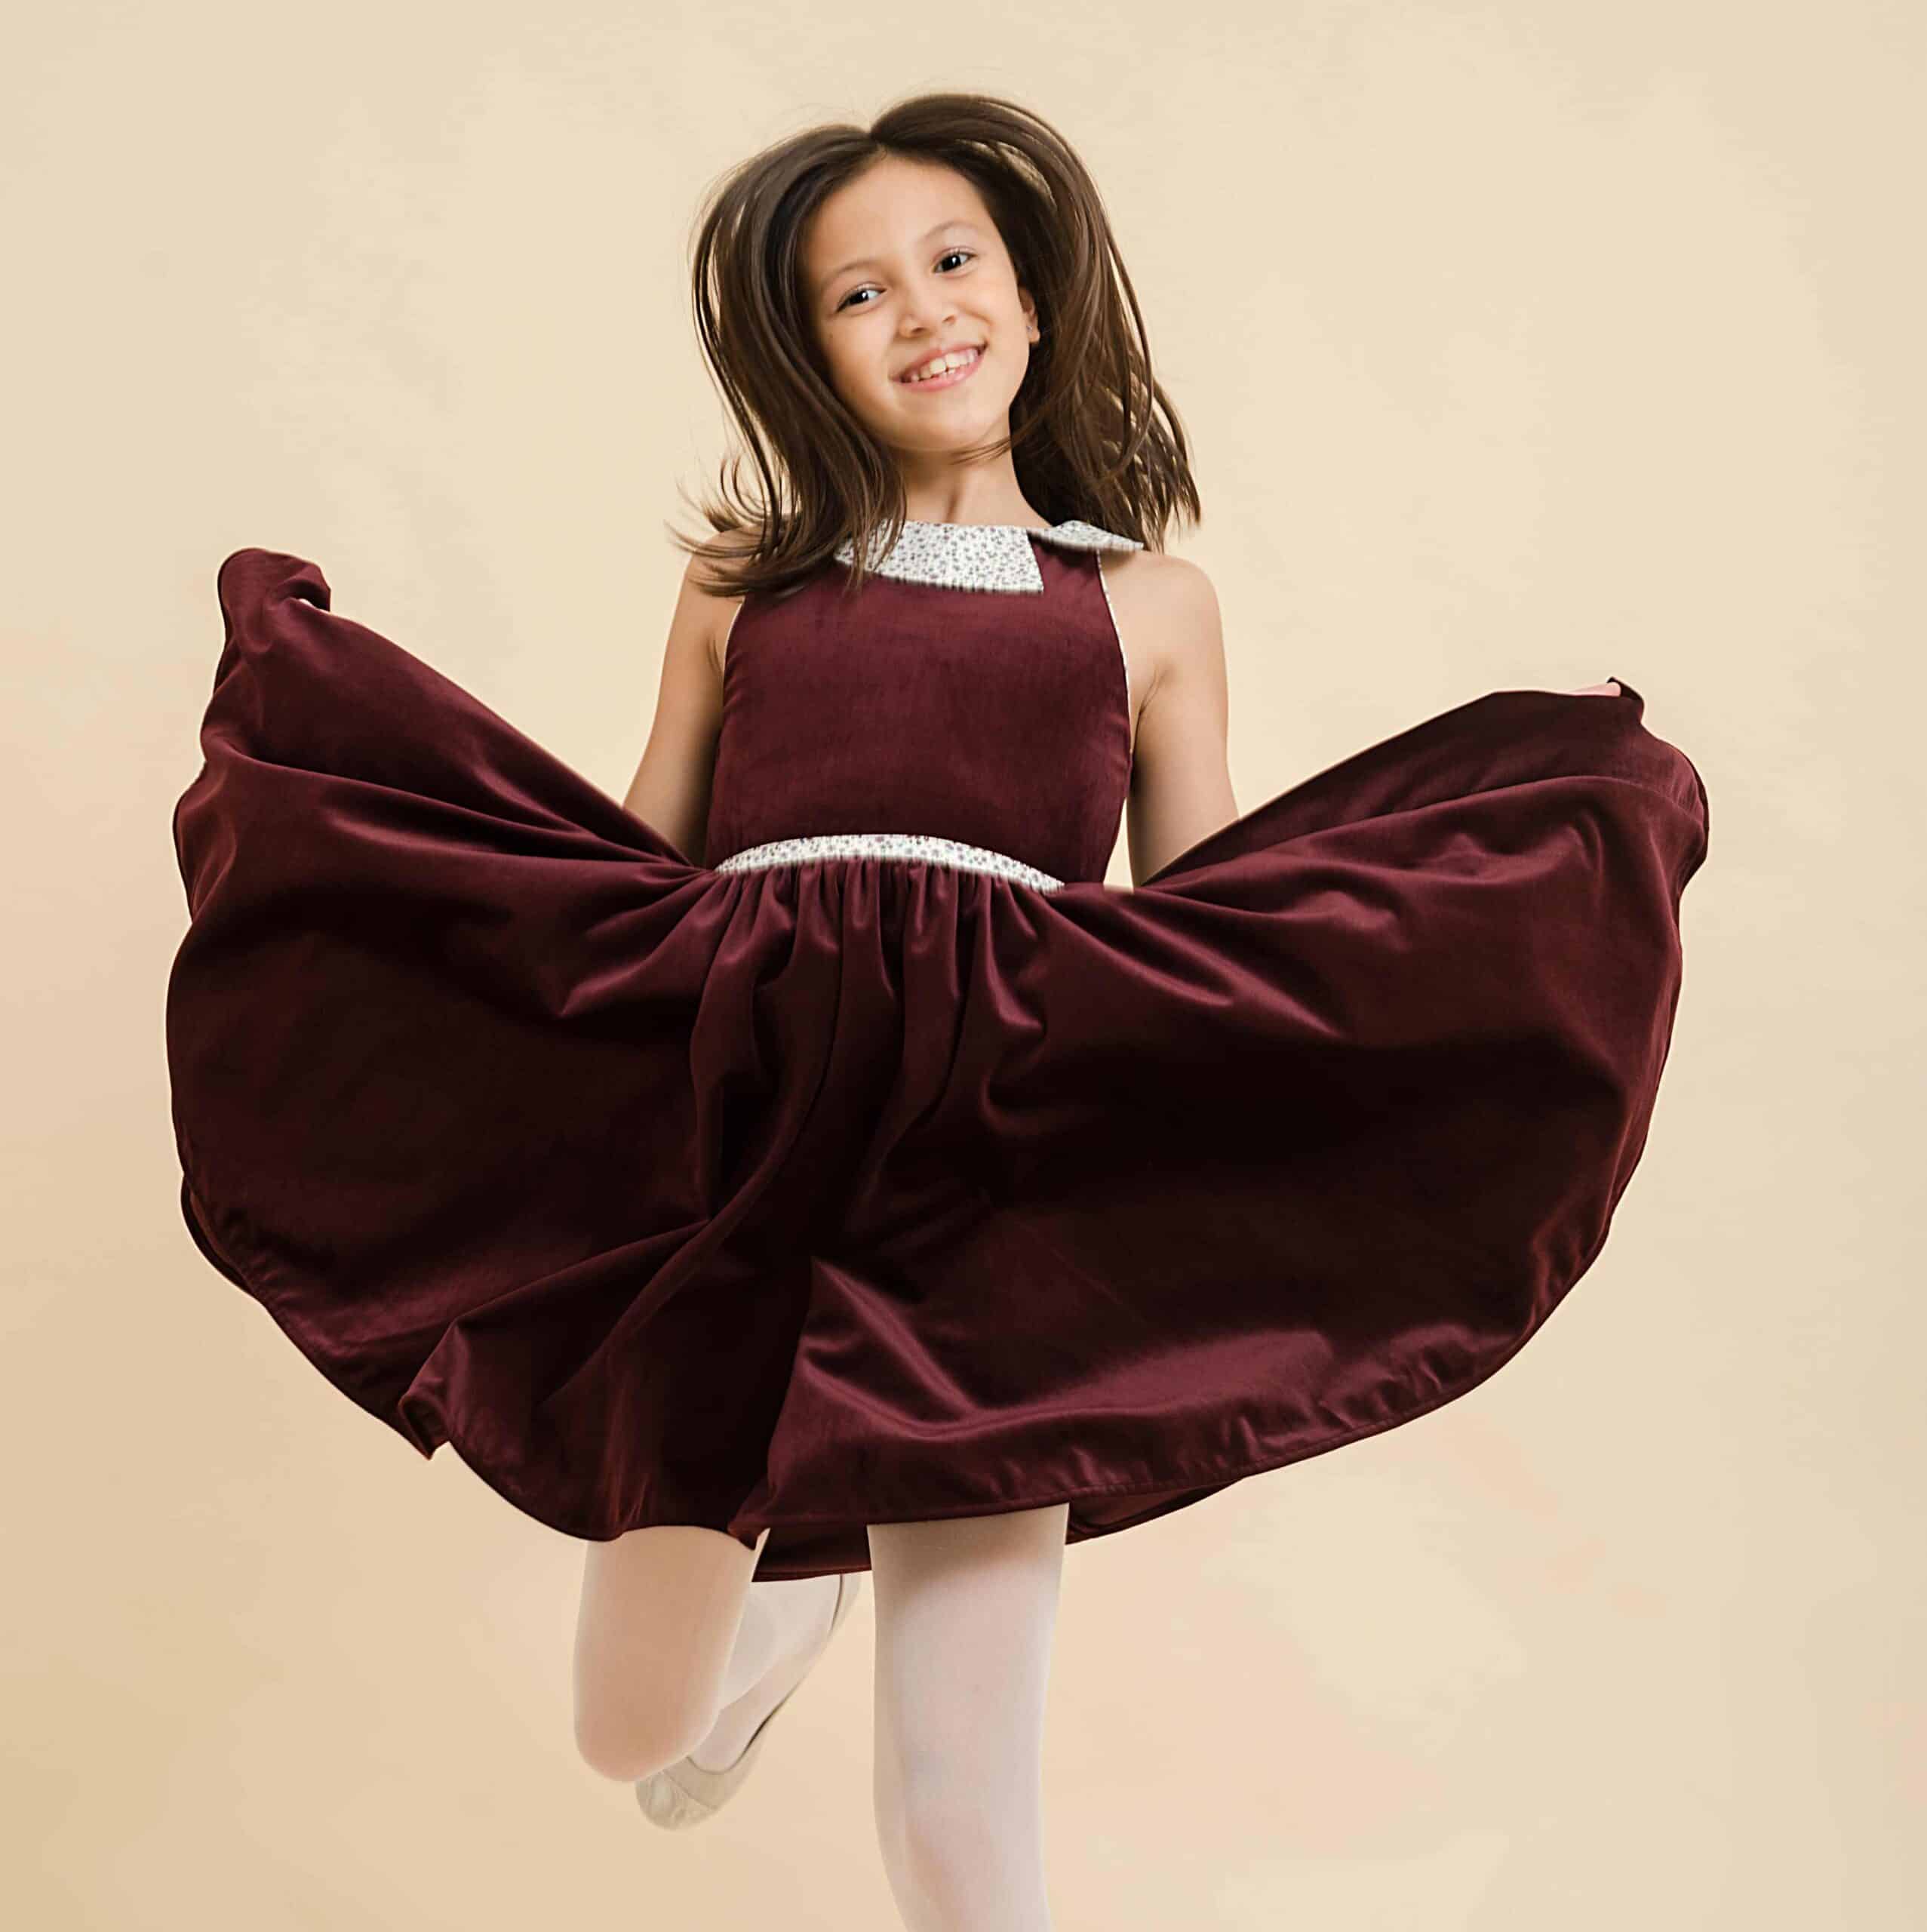 Turning dress for girls in burgundy velvet and small purple flowers collar from the children's fashion brand la faute a voltaire